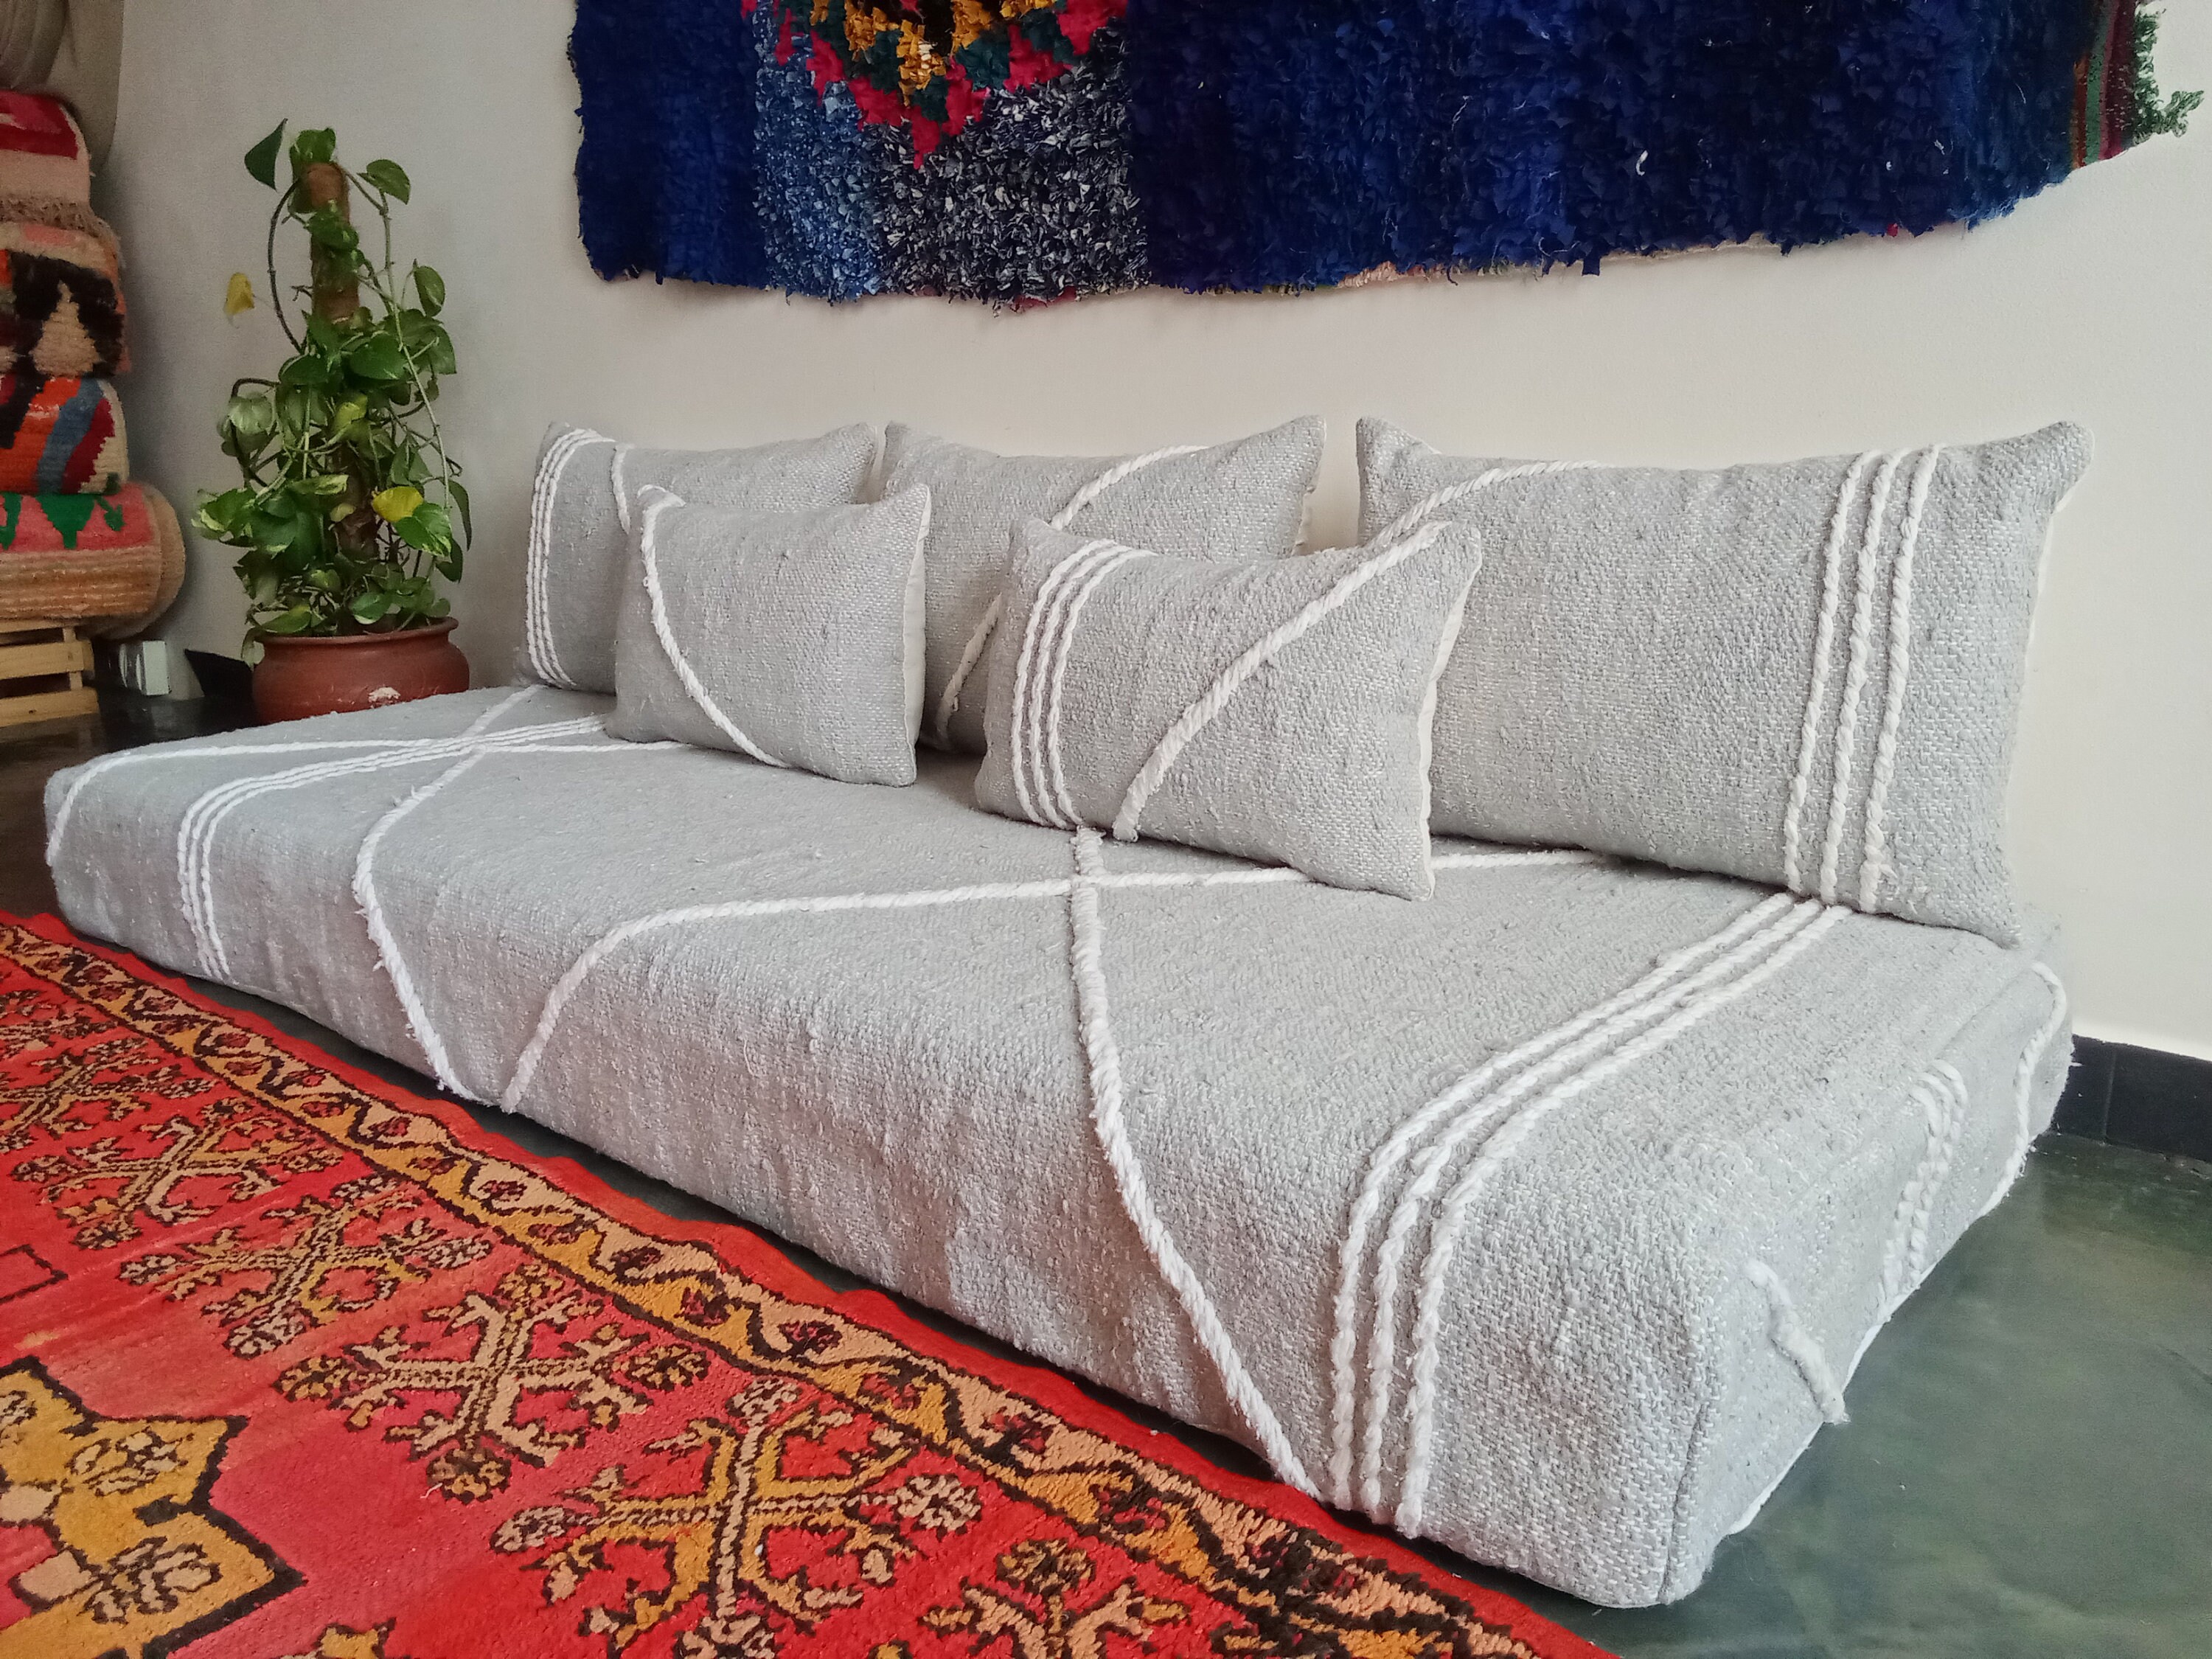 Moroccan Floor Couch 4,5,6 & 7 Ft 120/150/180/210 Cm Unstuffed Long Floor Cushion  Sofa Cylindrical Back Cushion Stuffing Pouches 